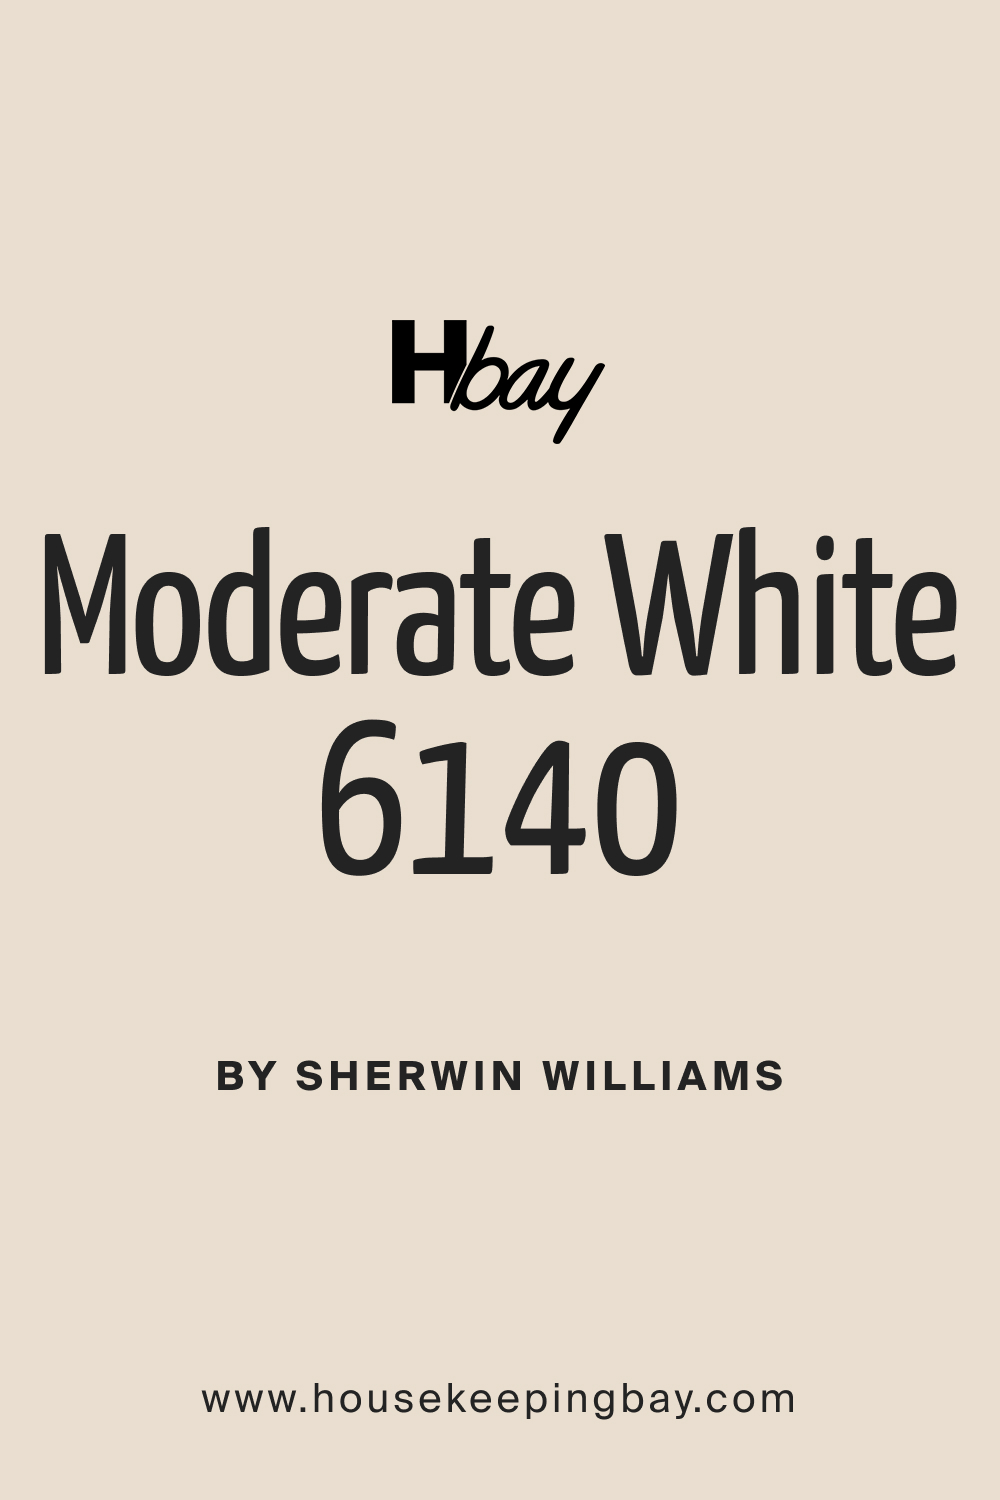 SW 6140 Moderate White Paint Color by Sherwin Williams